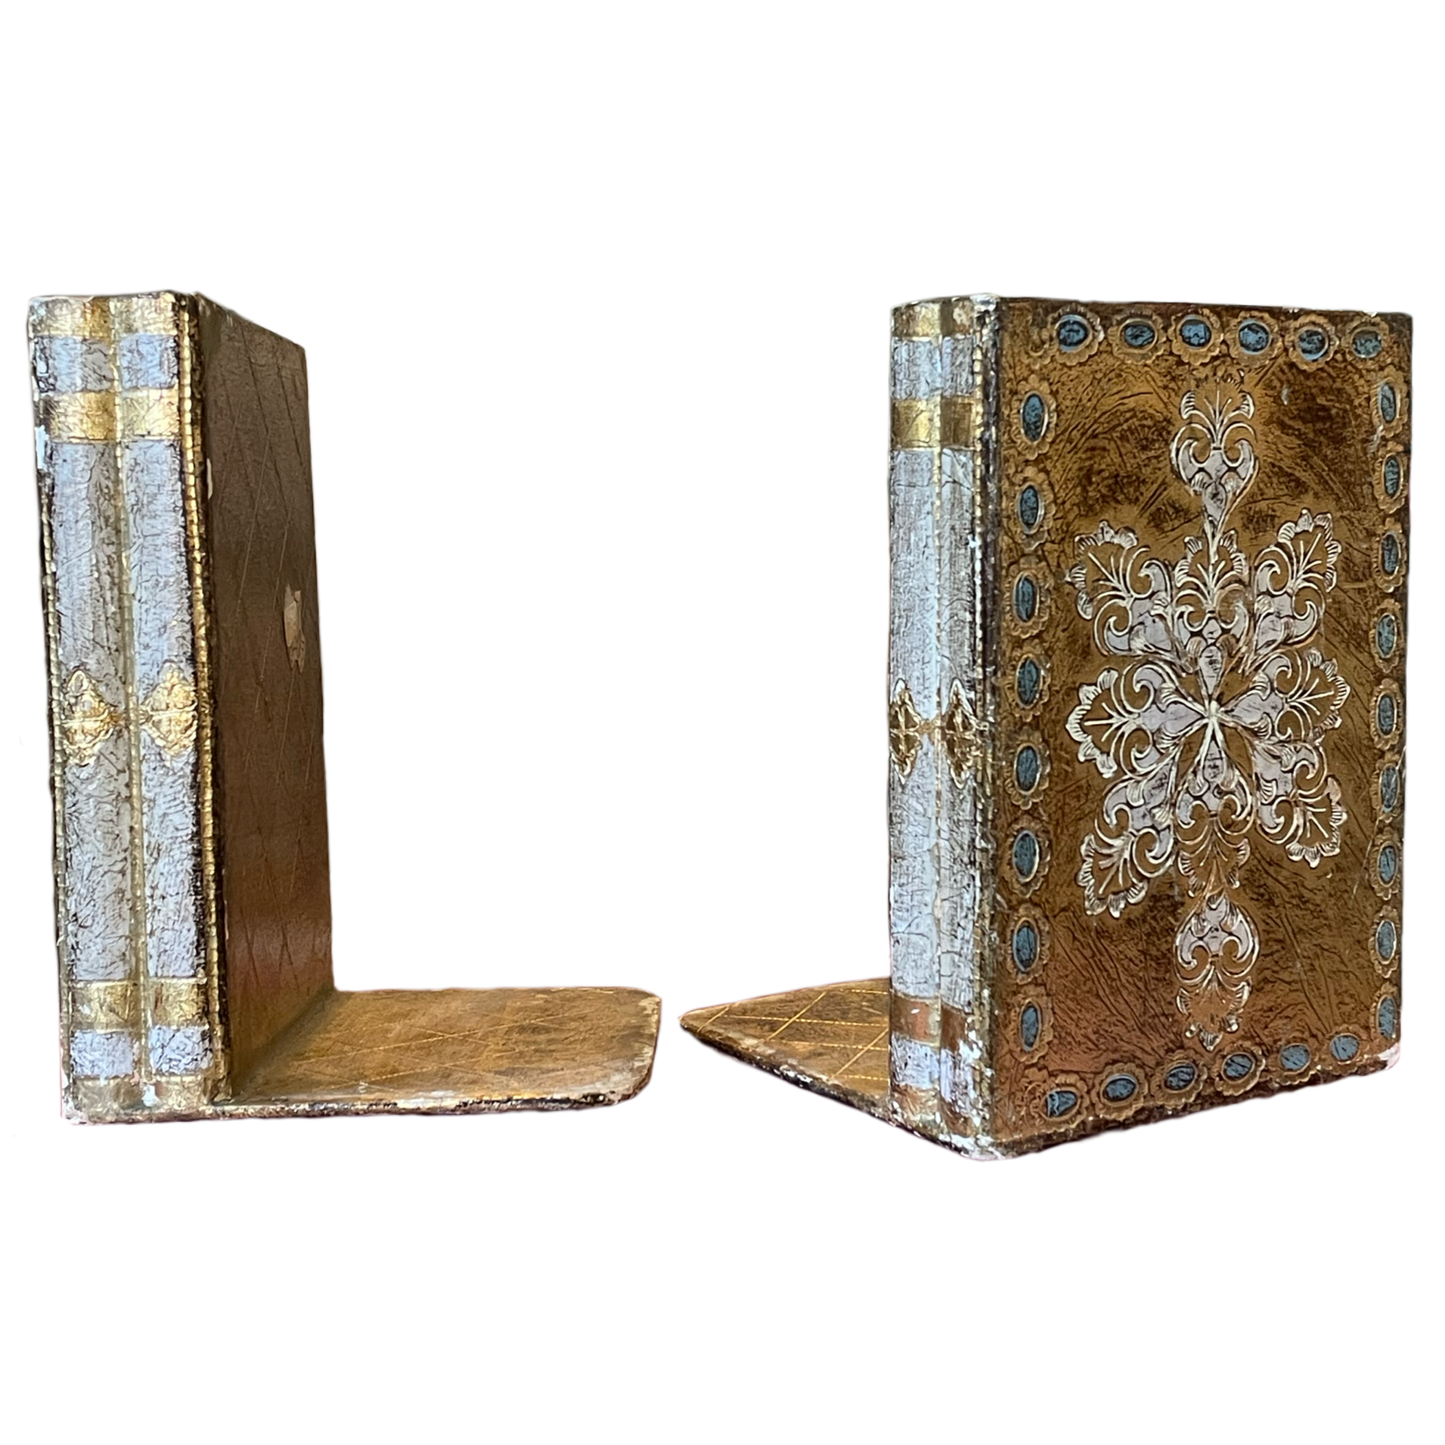 Florentine Gilded Bookends